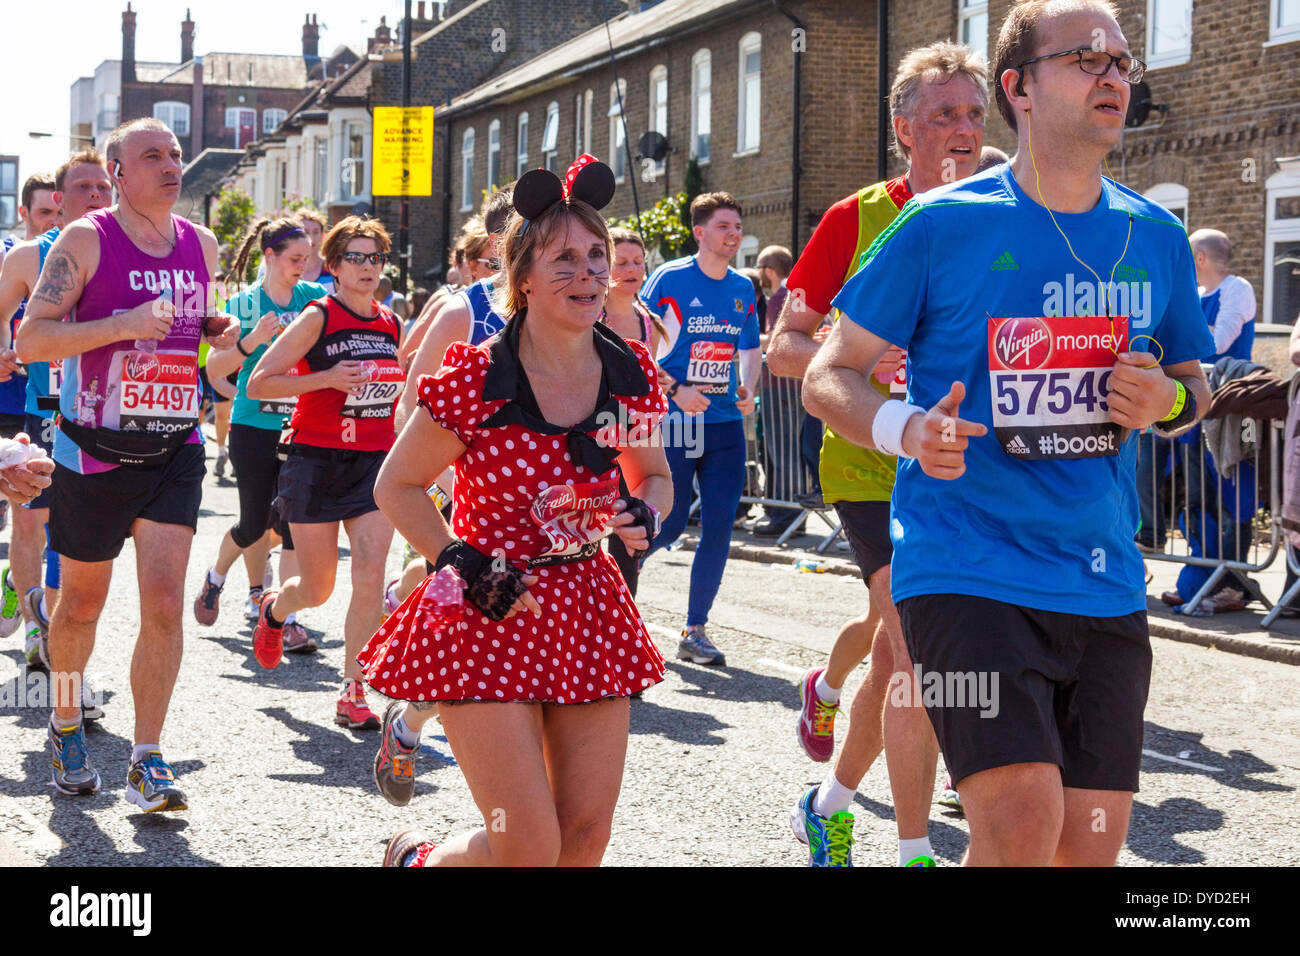 London UK. 13 April 2014 London Virgin Money Marathon runner 54745 Jackie Scarfe of Great Britain running as Minnie Mouse in a red polka dot outfit Credit:  John Henshall/Alamy Live News JMH6154 Stock Photo